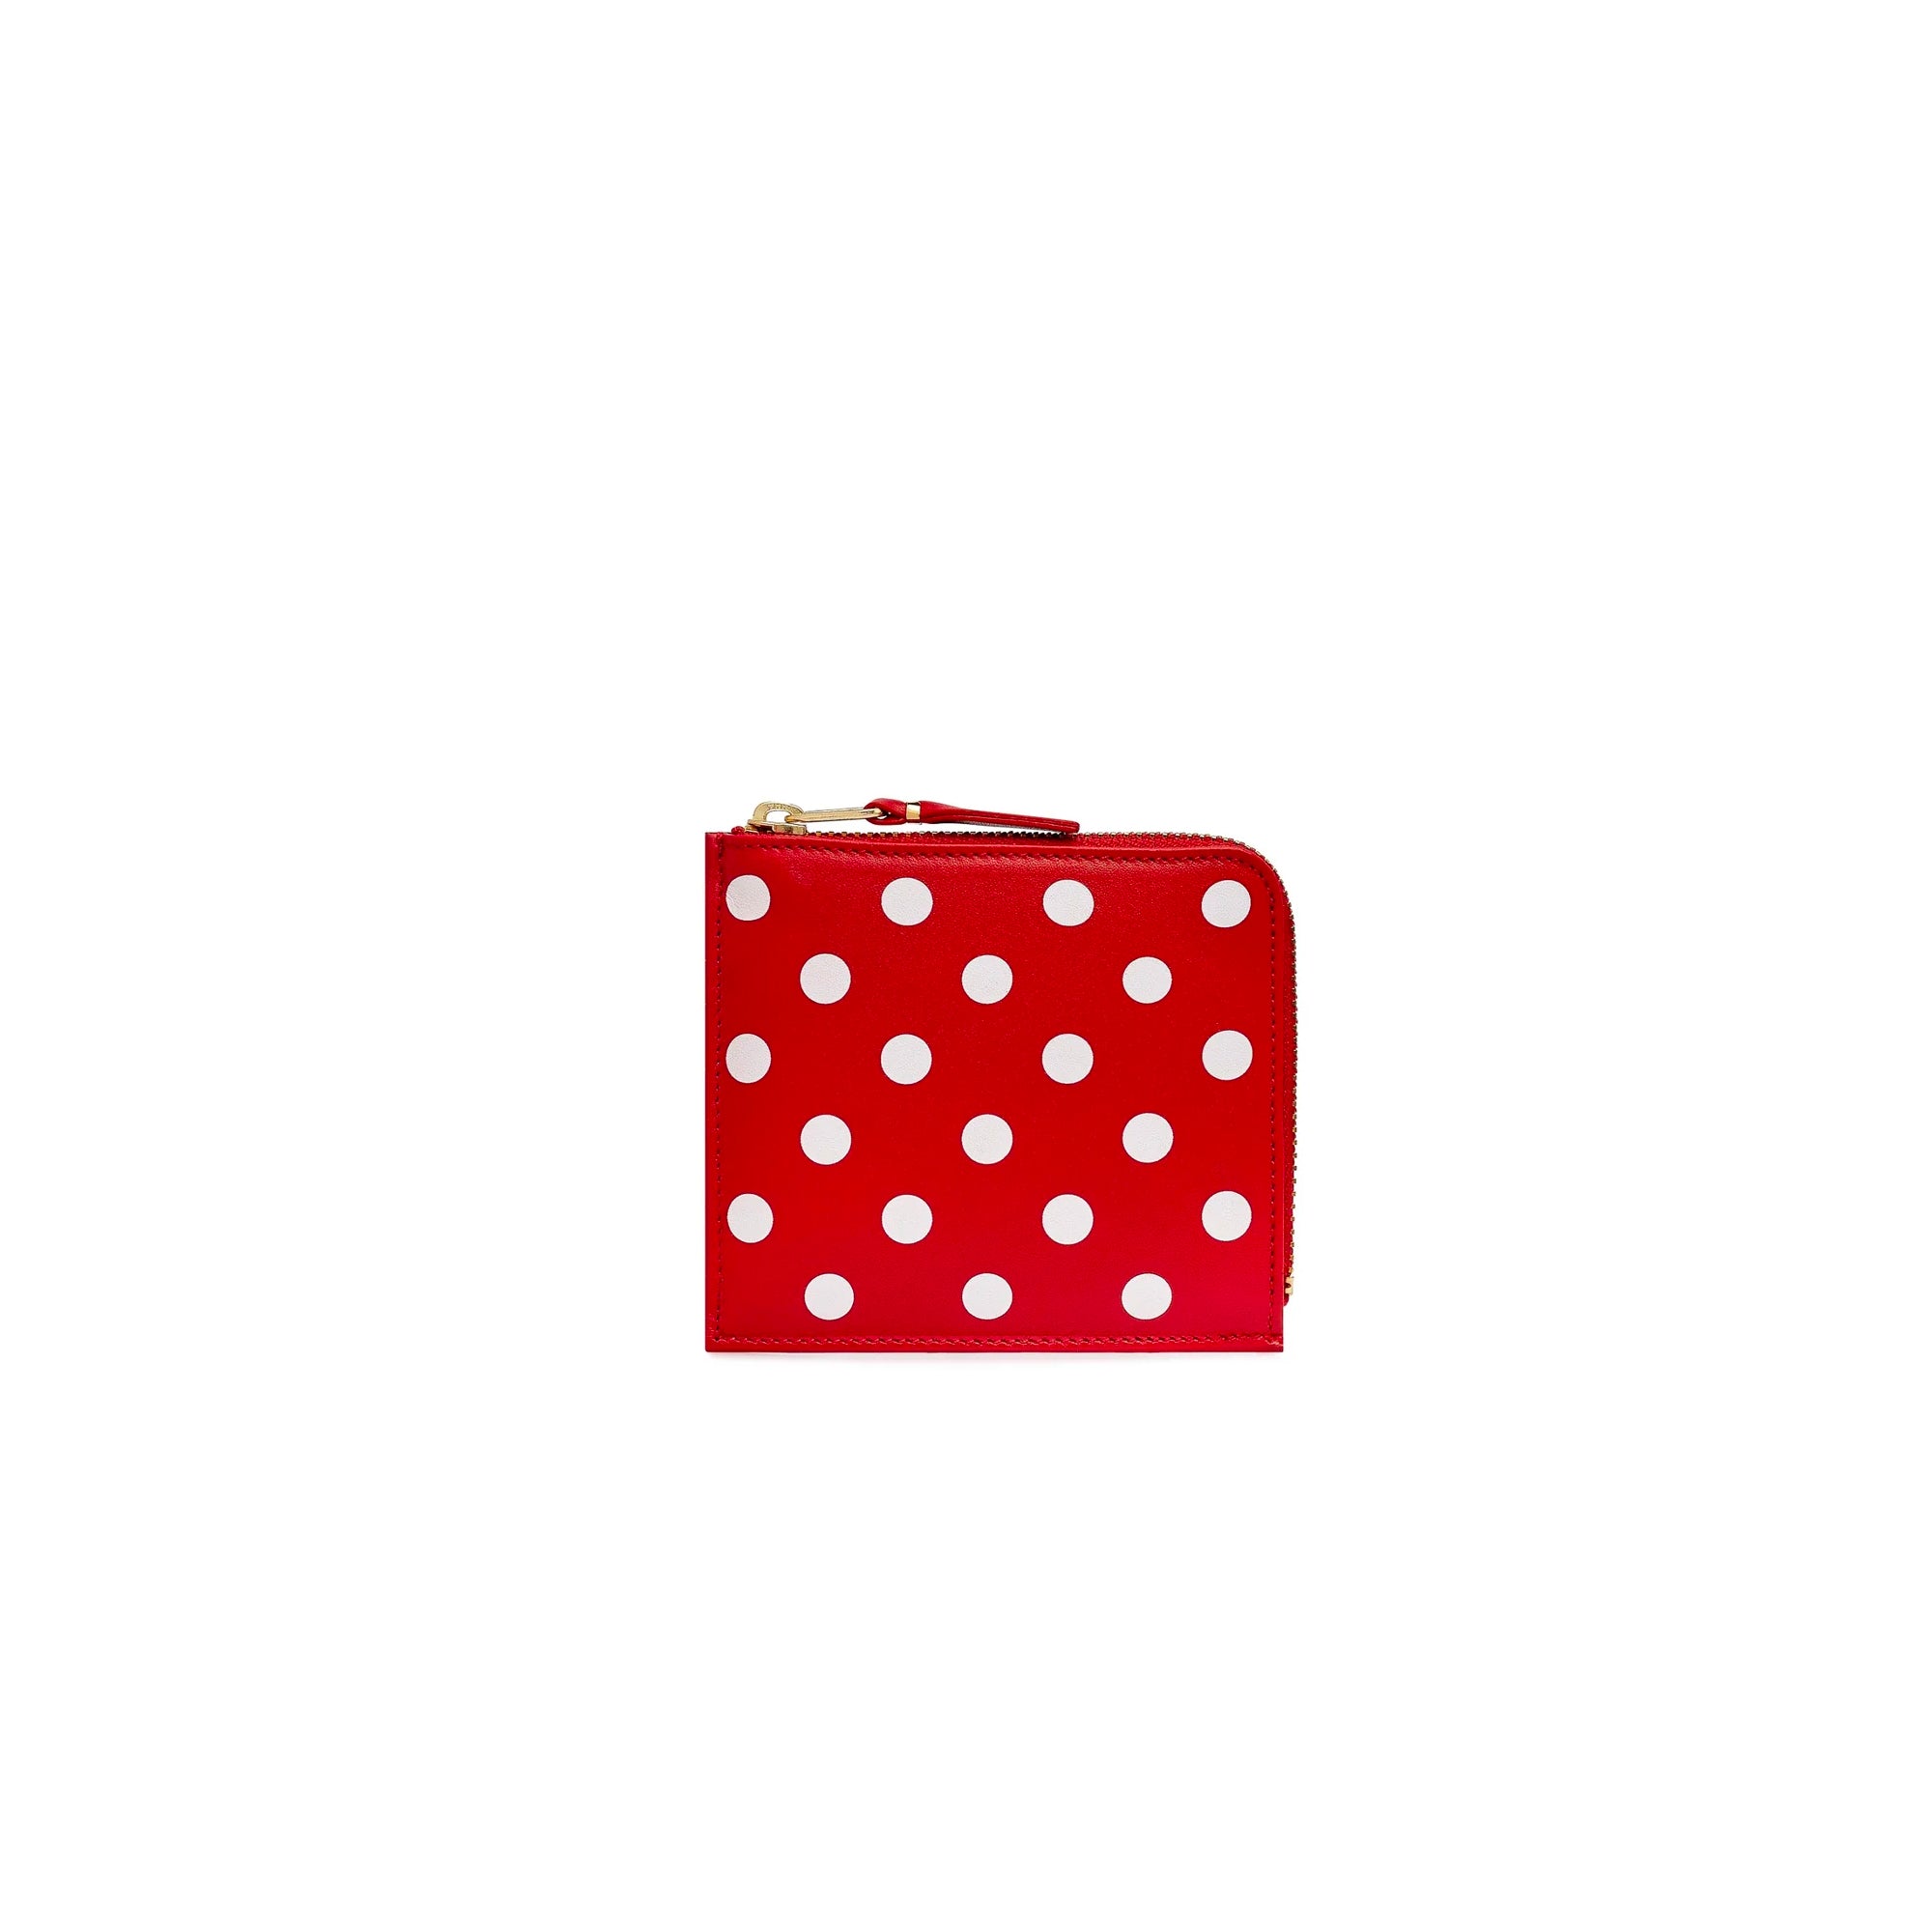 Comme des Garcons WALLET | Extra Butter